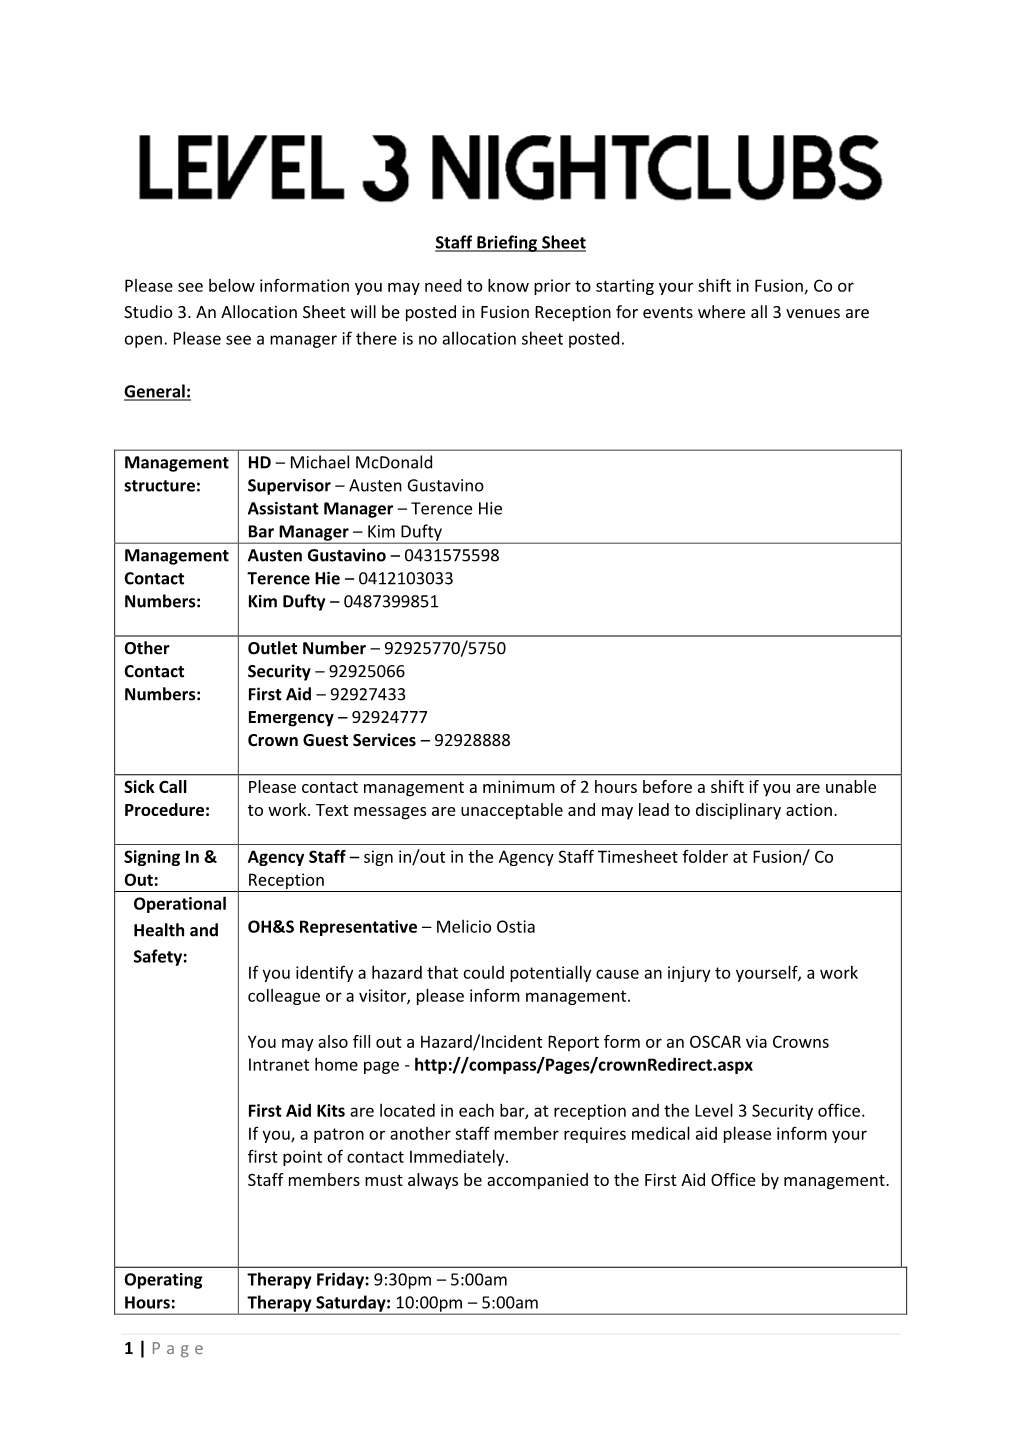 1 | Page Staff Briefing Sheet Please See Below Information You May Need to Know Prior to Starting Your Shift in Fusion, Co Or St